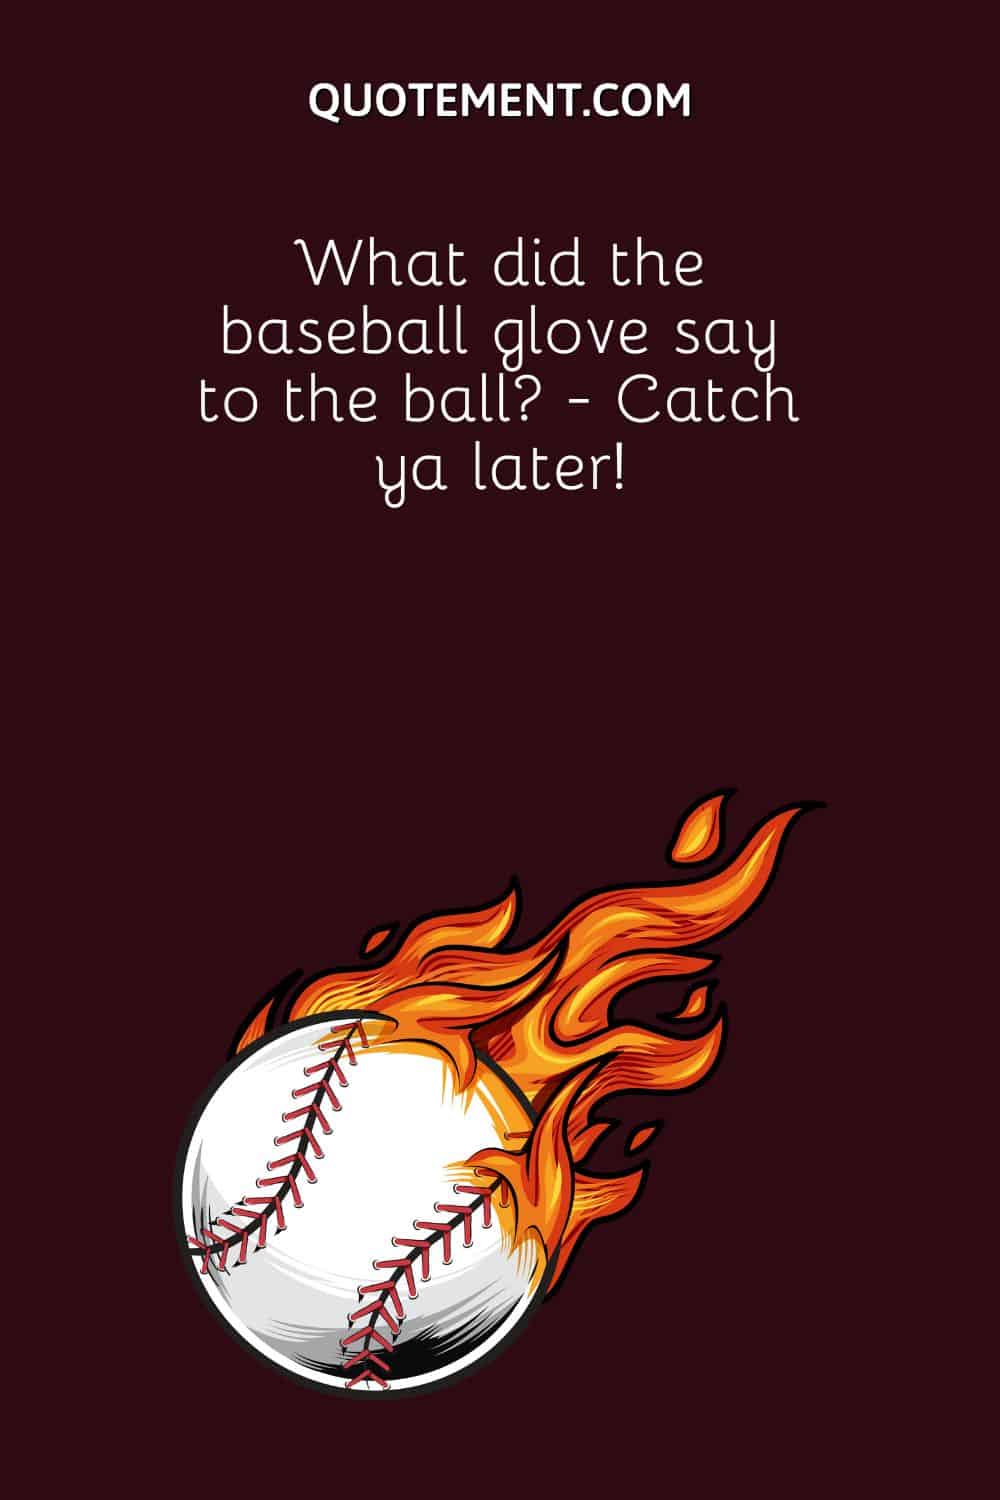 What did the baseball glove say to the ball